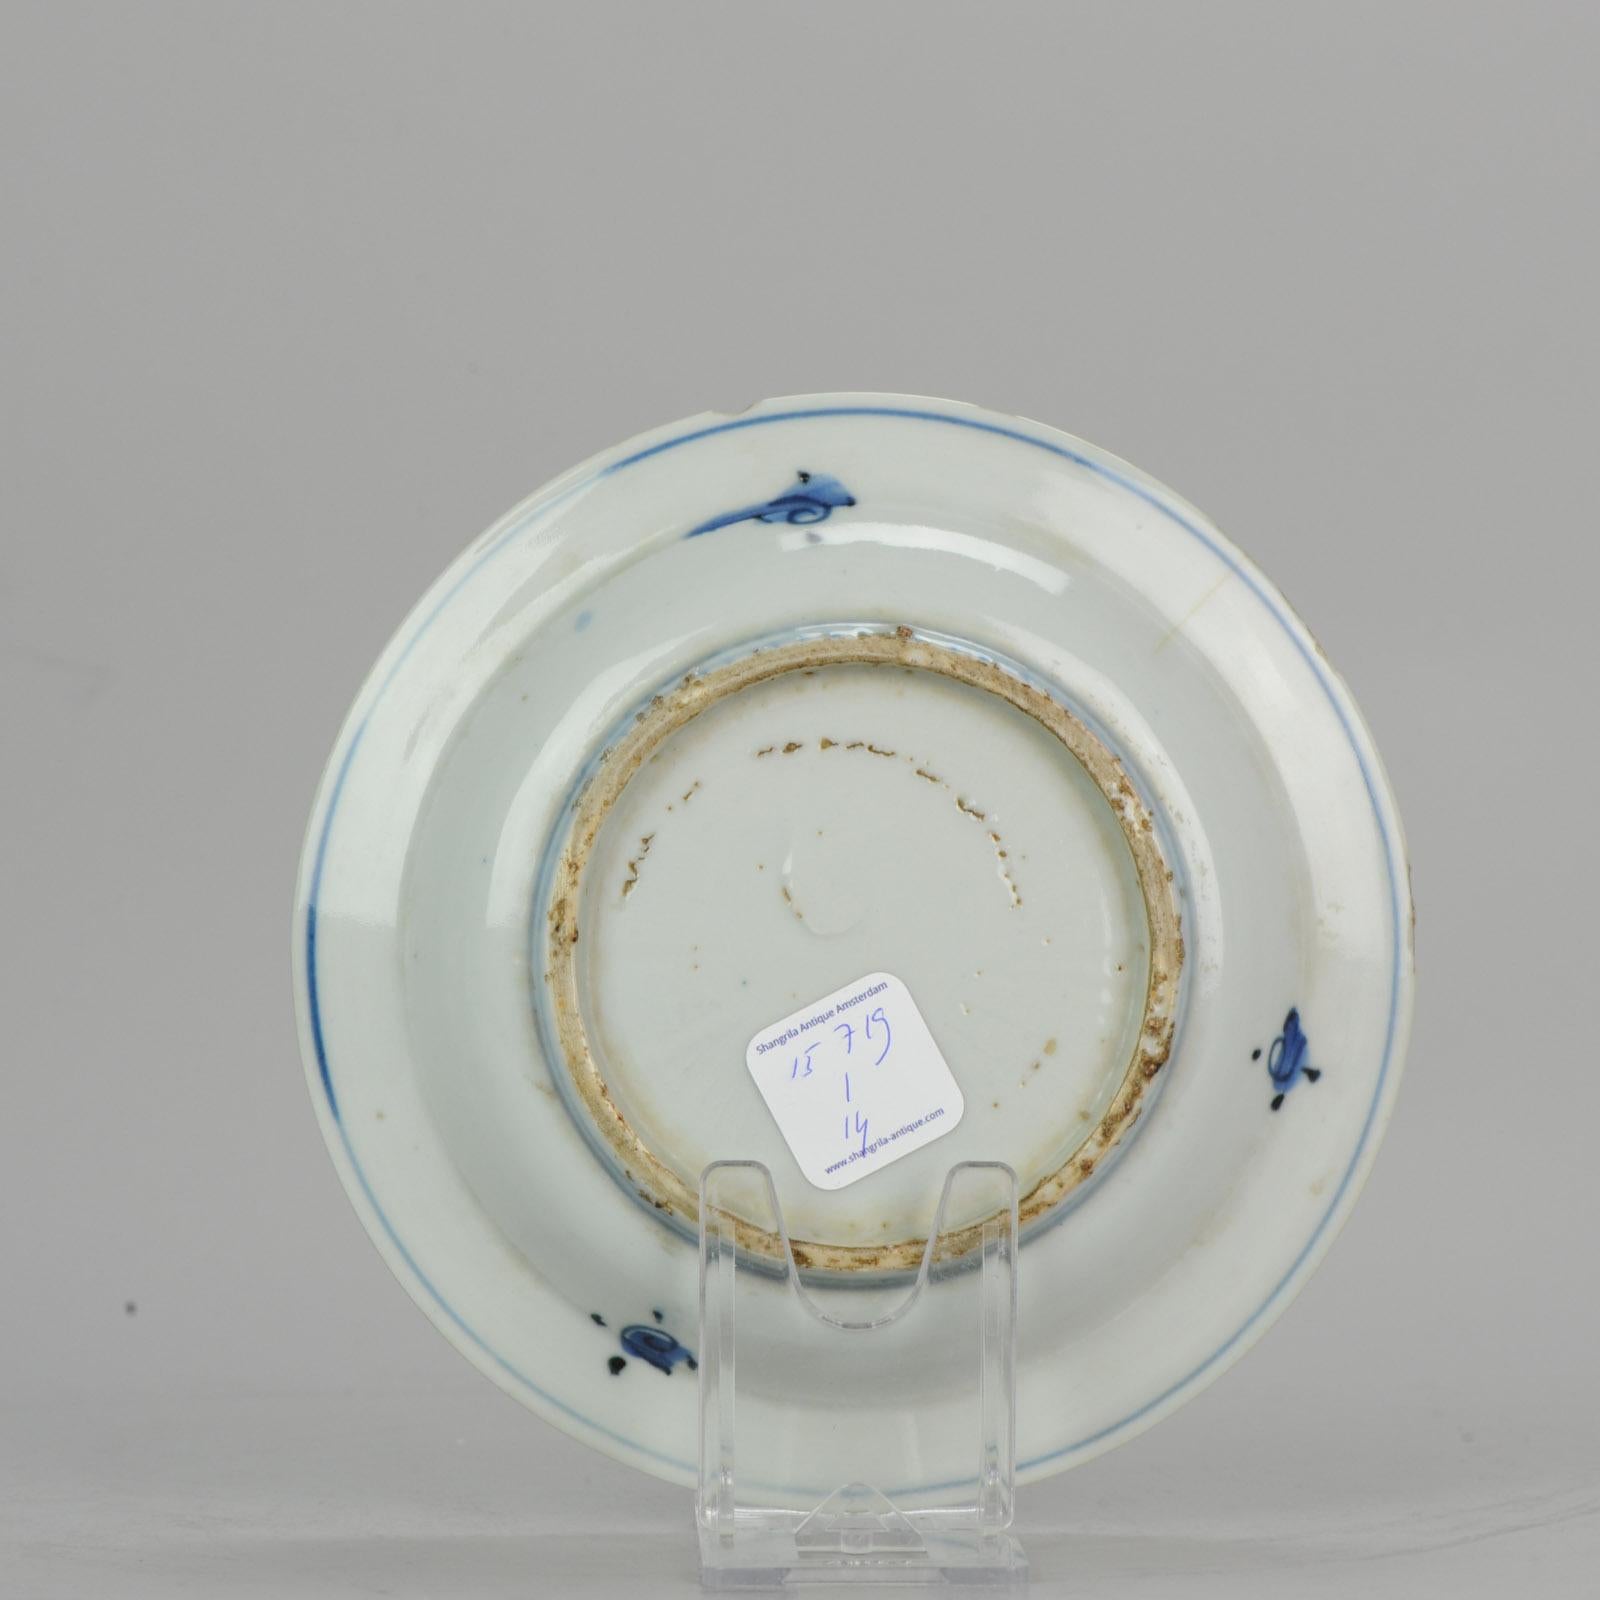 18th Century and Earlier Chinese Porcelain Plate 17th Century Lotus Fishing Ming Dynasty Tianqi/Chongzhen